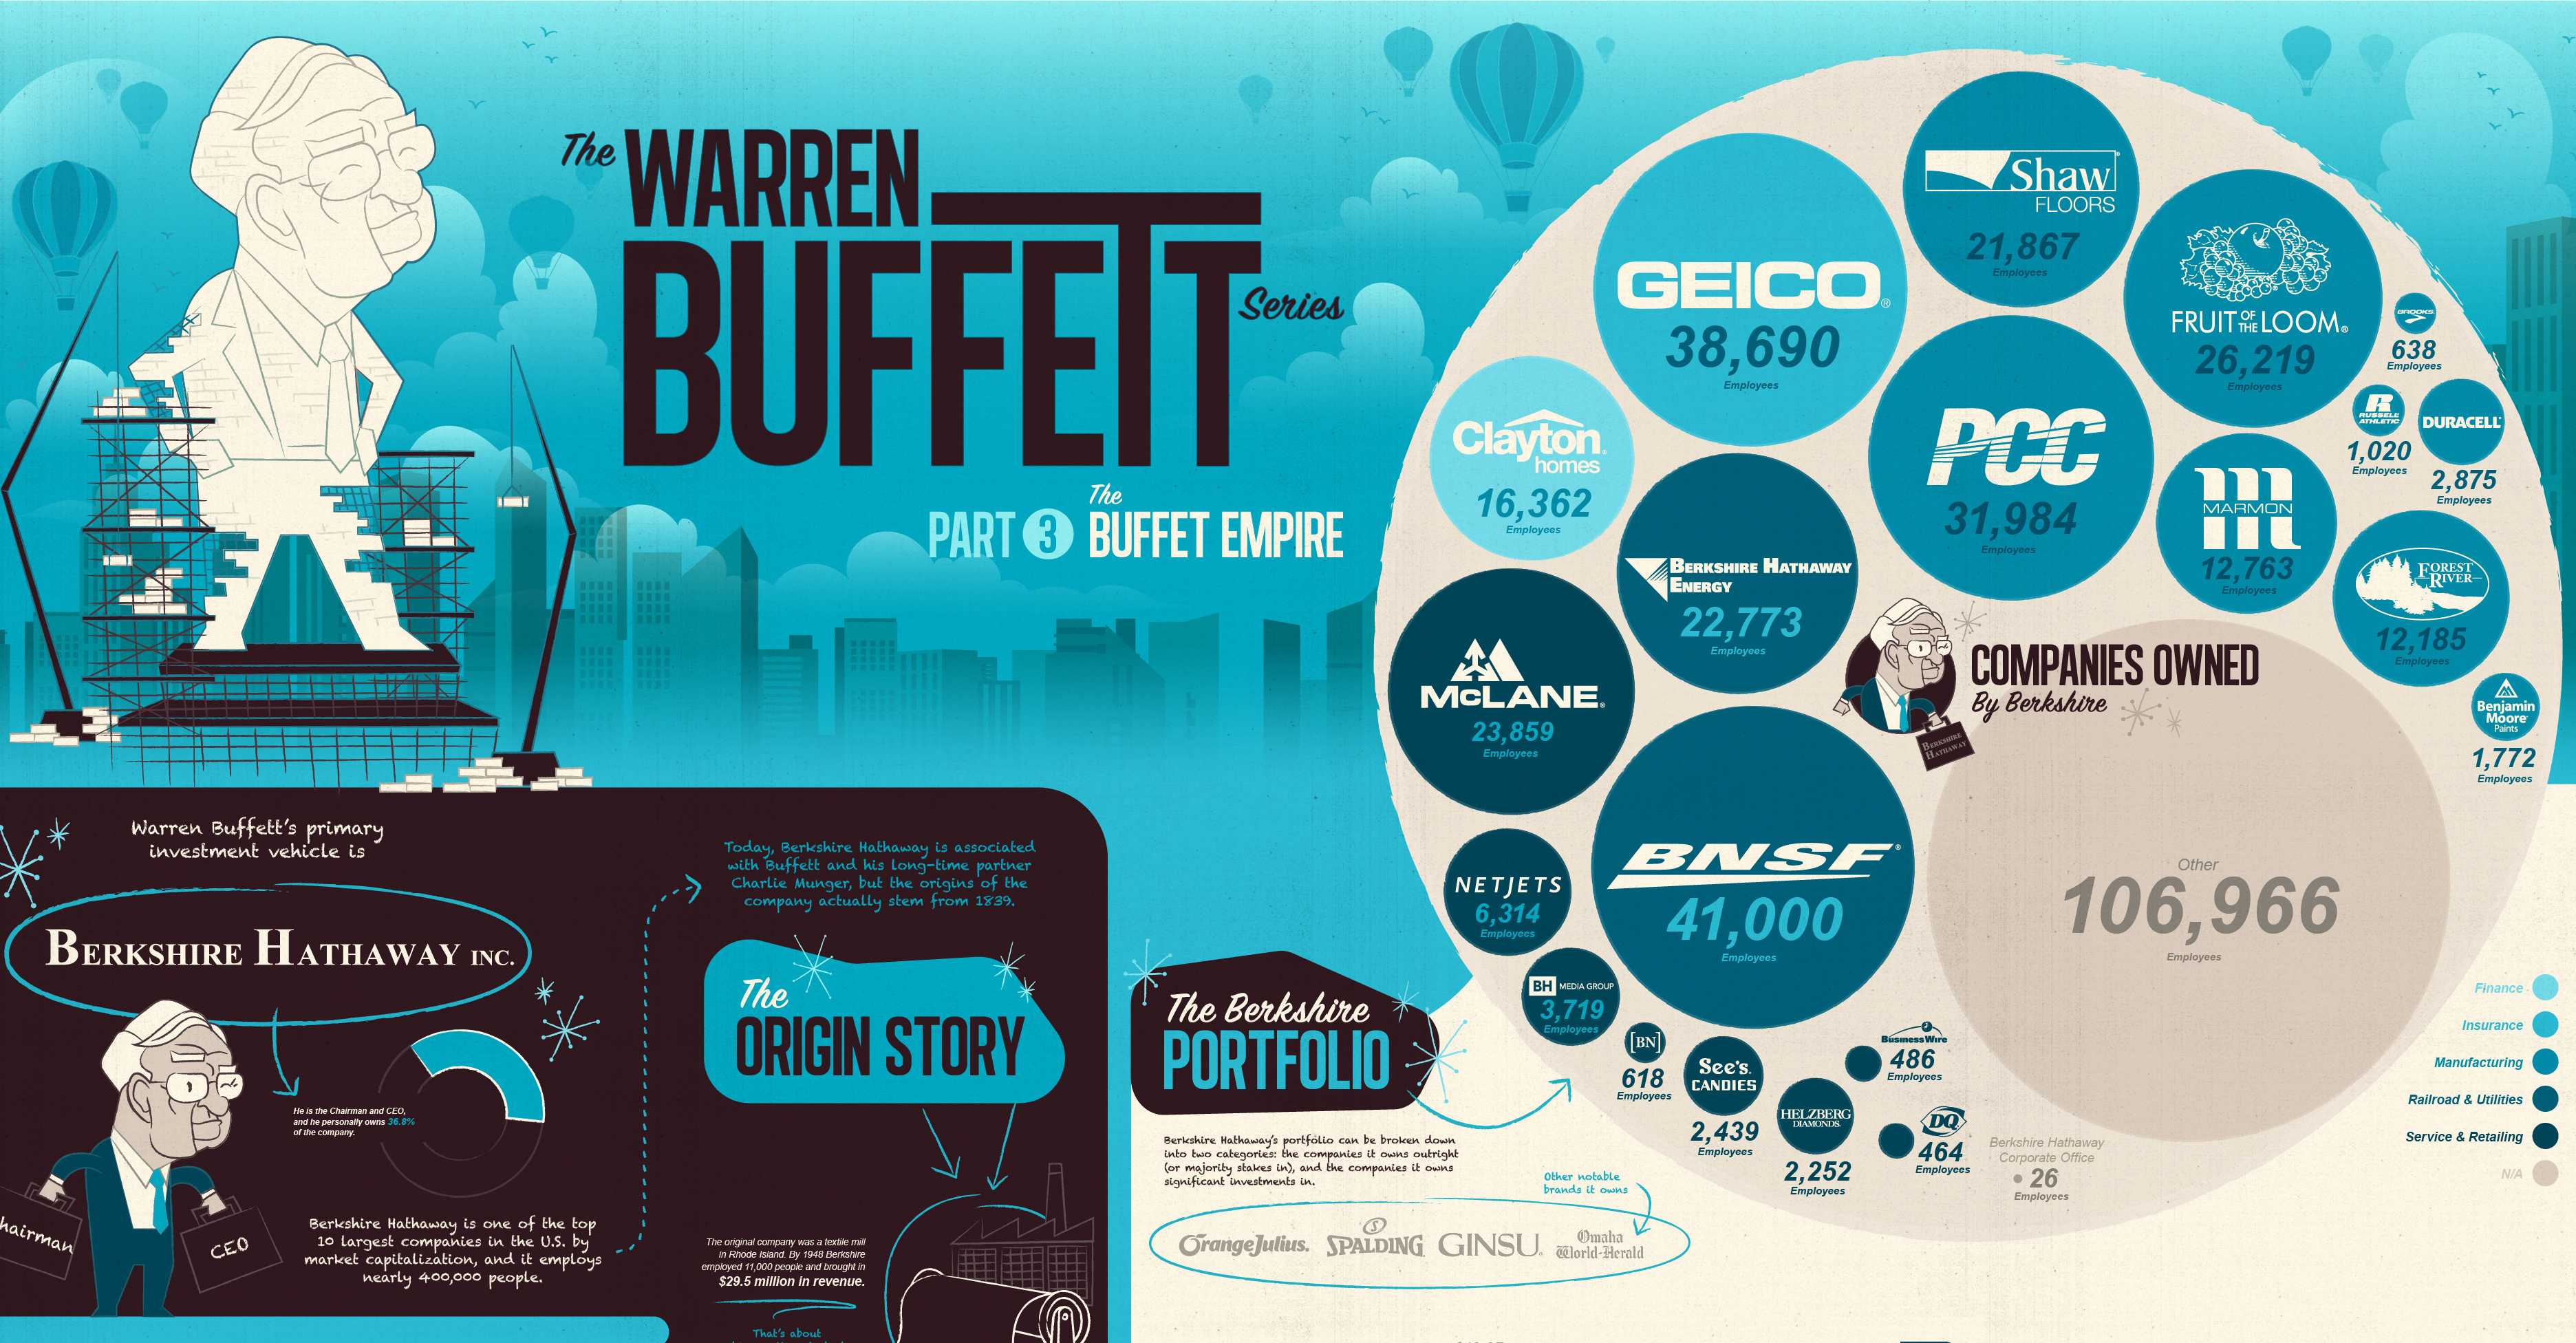 Companies that warren buffett invests in forexyard mobile trading platforms